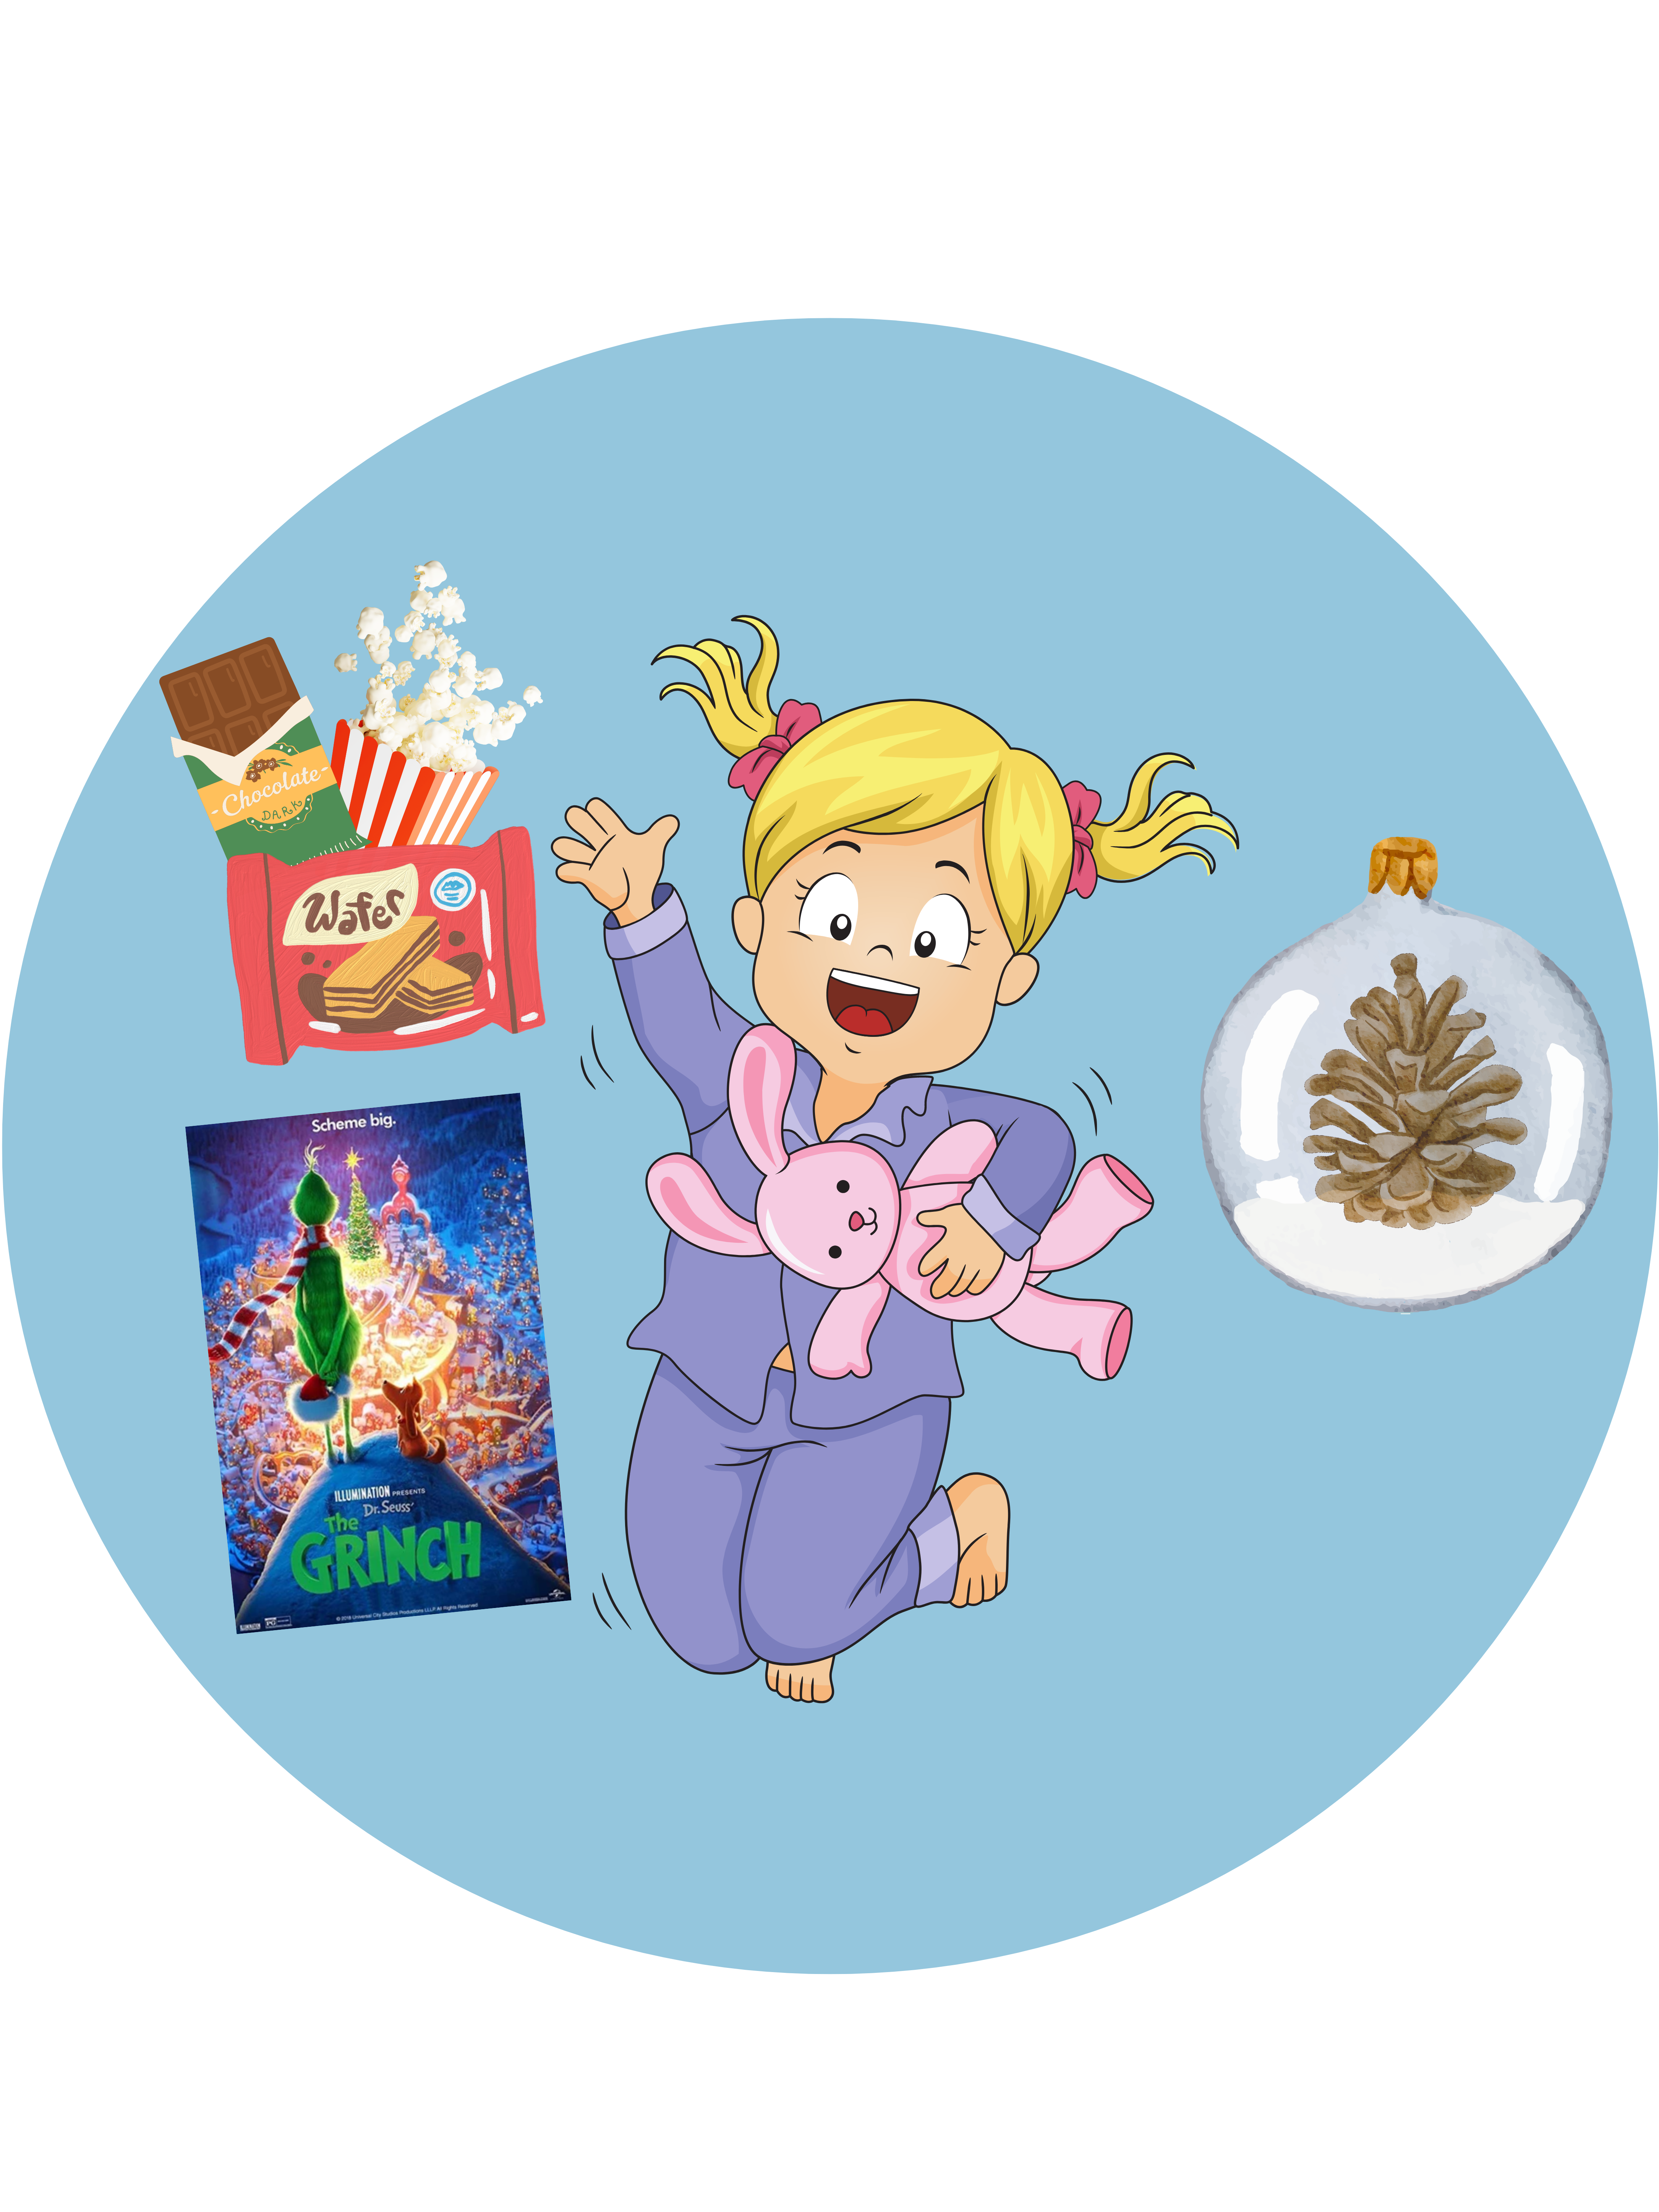 Little Girl Jumping with Candy, ornament and Grinch Movie